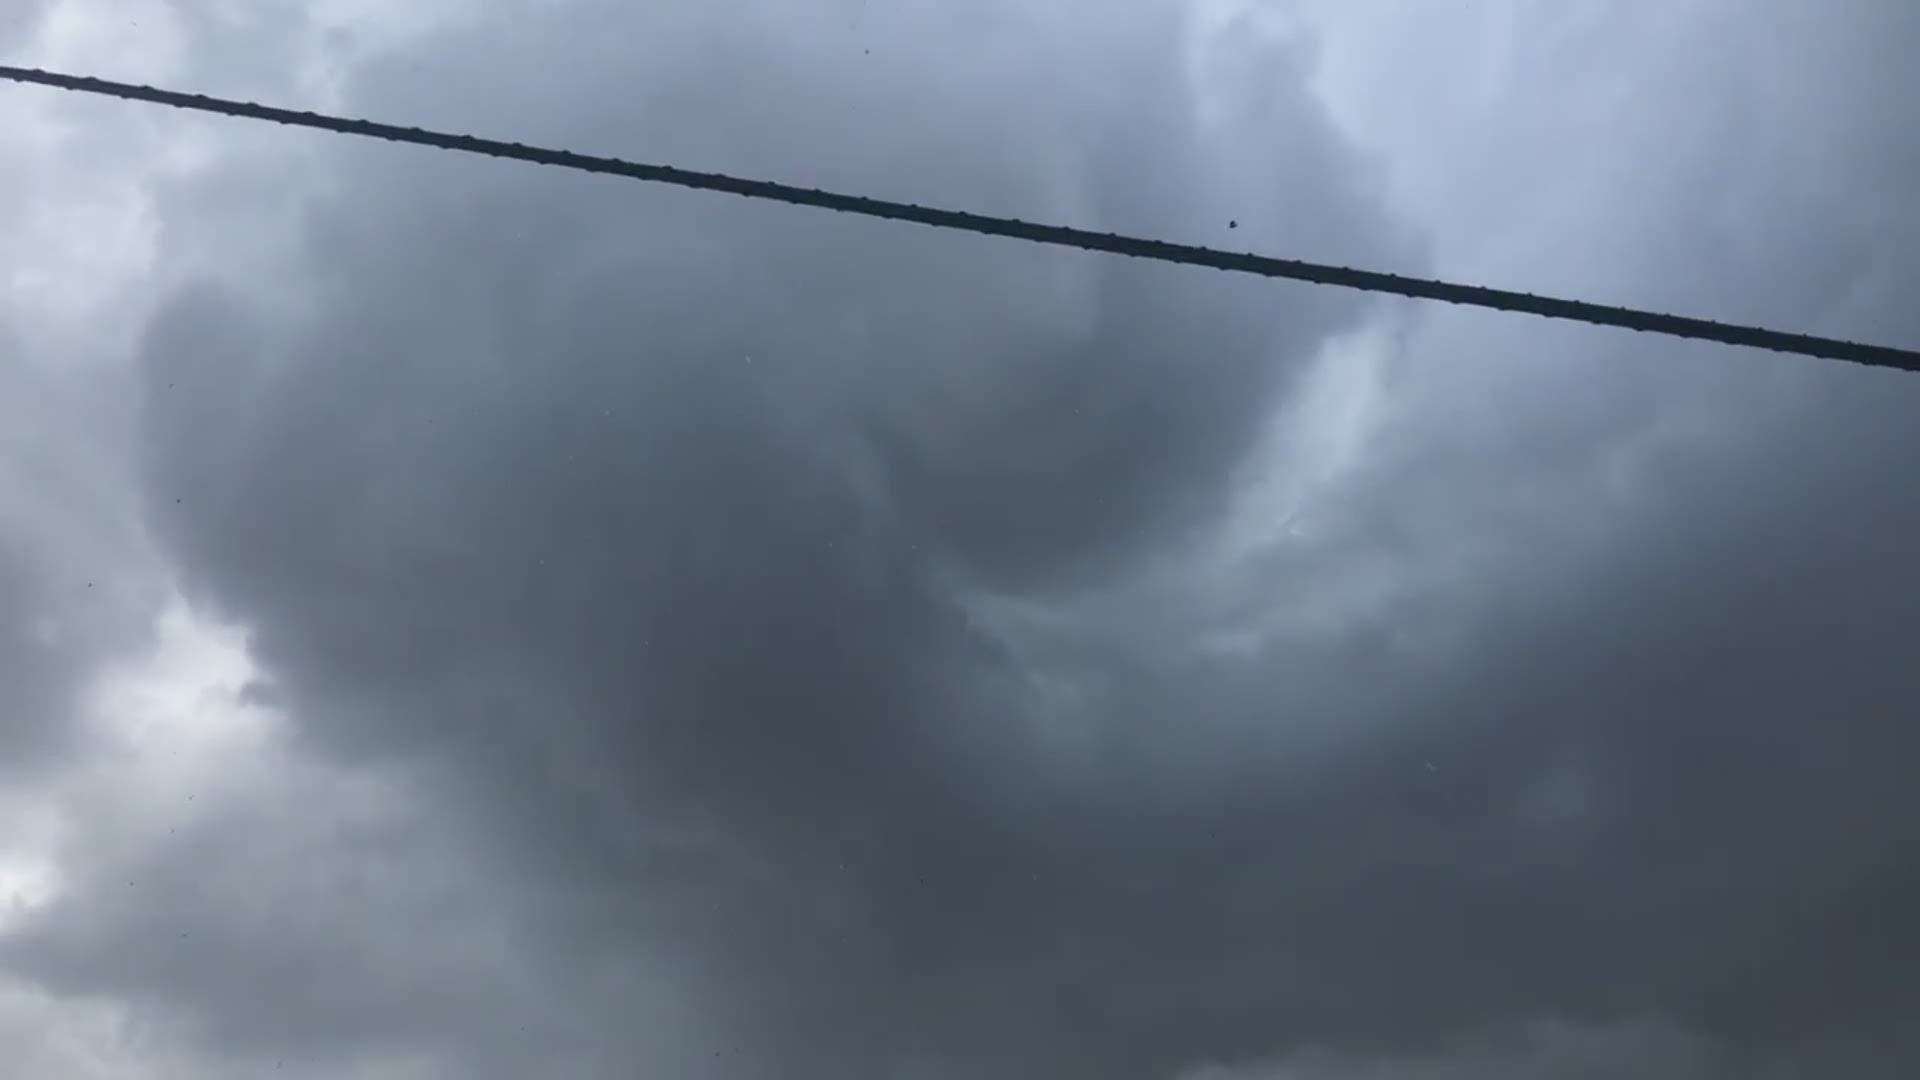 The National Weather Service has confirmed there may have been a funnel cloud in NE Portland. A viewer sent us this video of clouds seemingly in rotation.